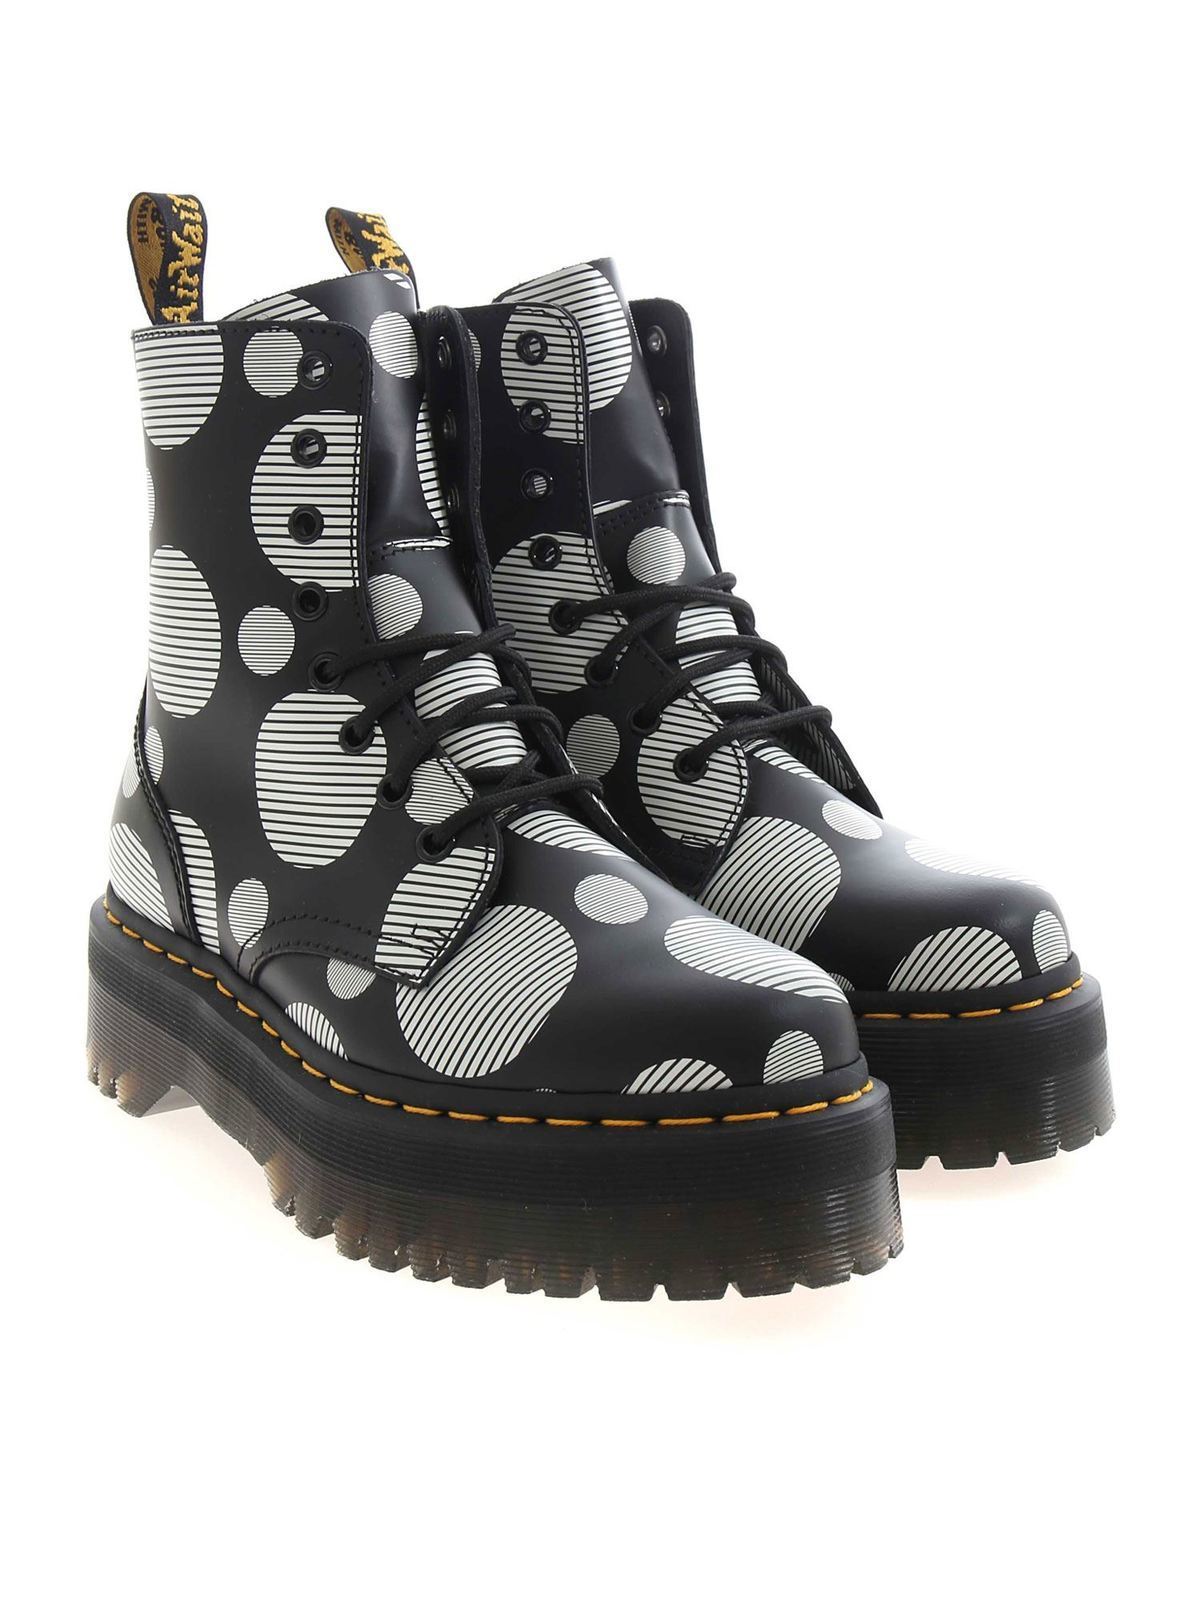 Person in charge Haiku basin Ankle boots Dr. Martens - Jadon ankle boots in black and white - 26882009